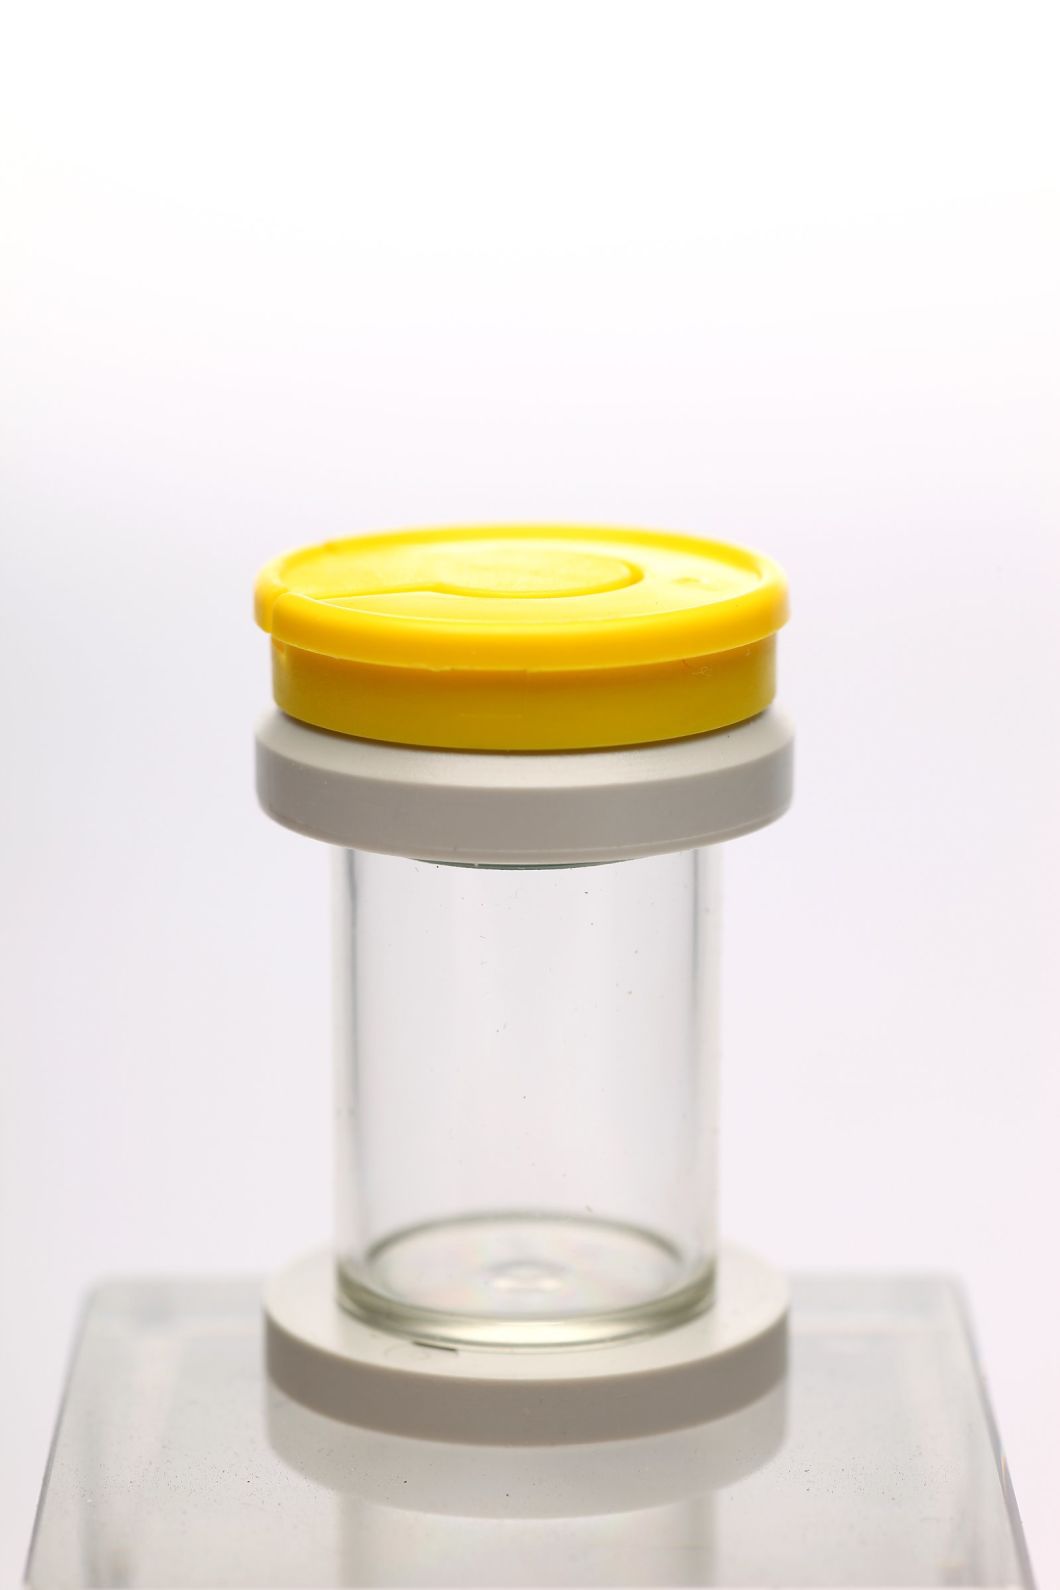 Disposable Sterile Specimen Container, Urine Container with Yellow Cap